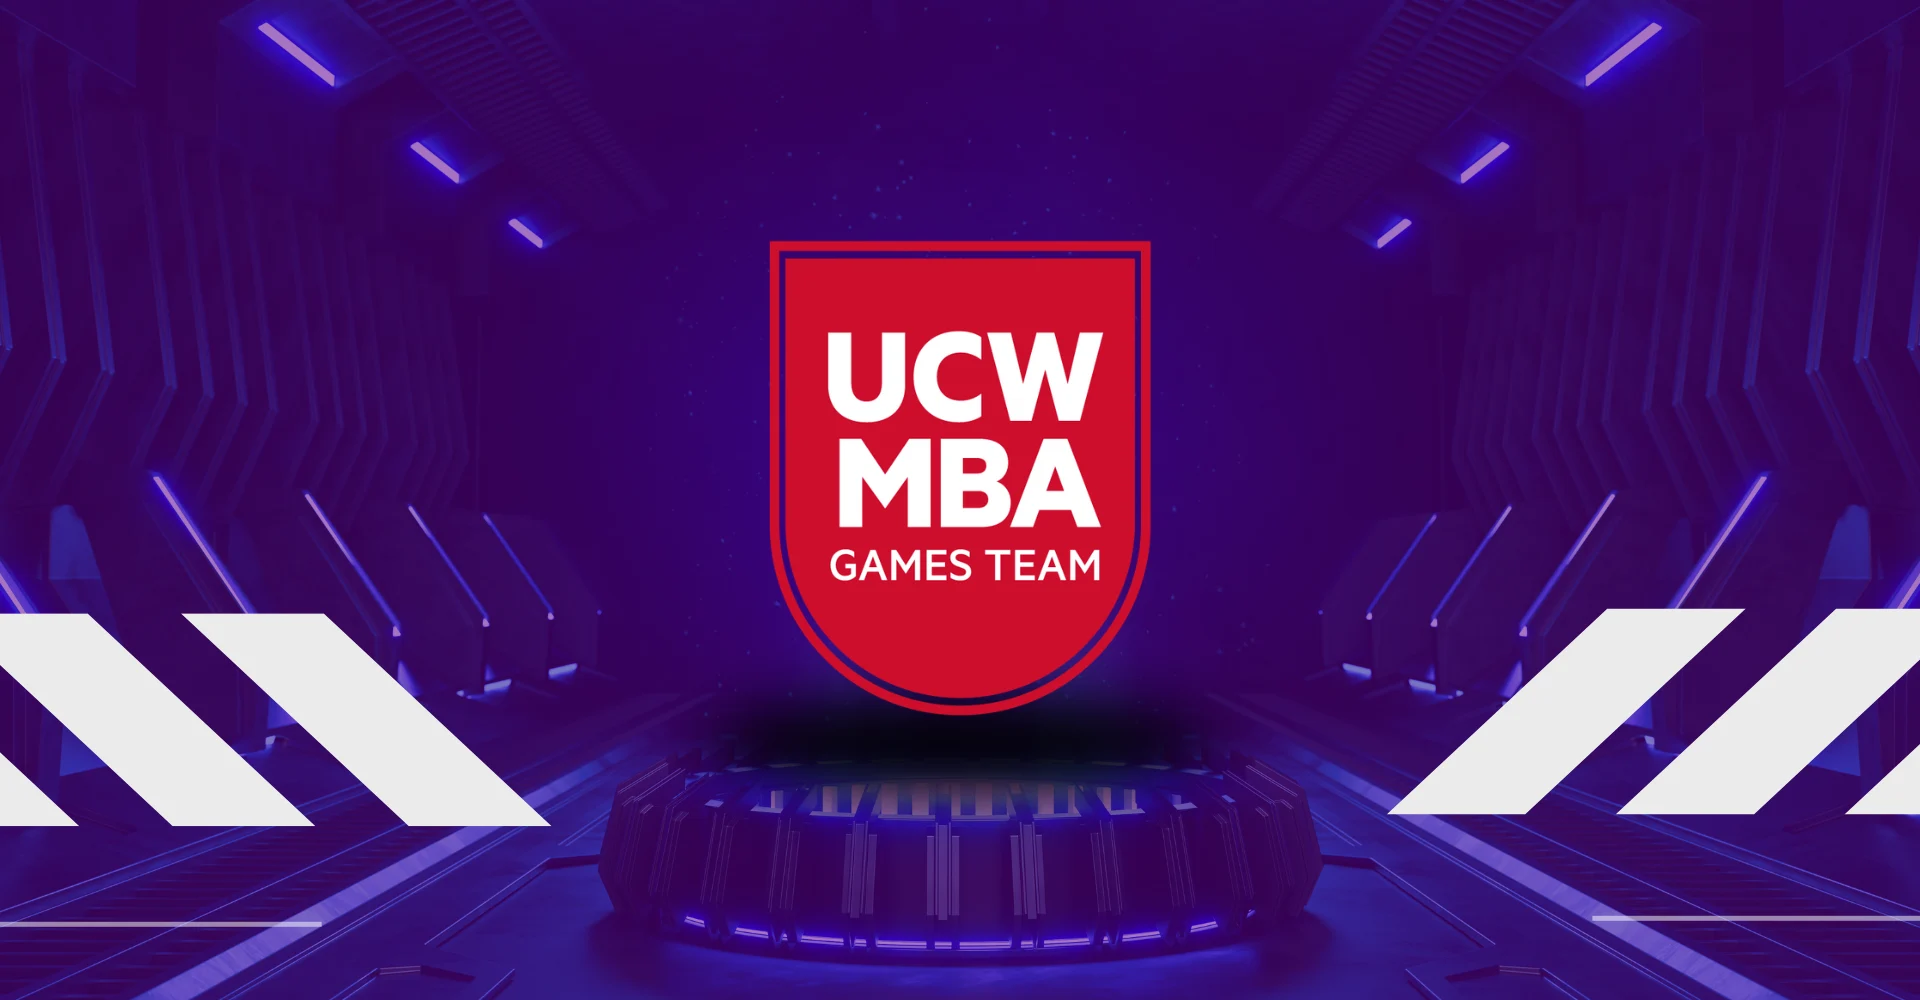  UCW to participate in 2023 MBA Games competition in Toronto